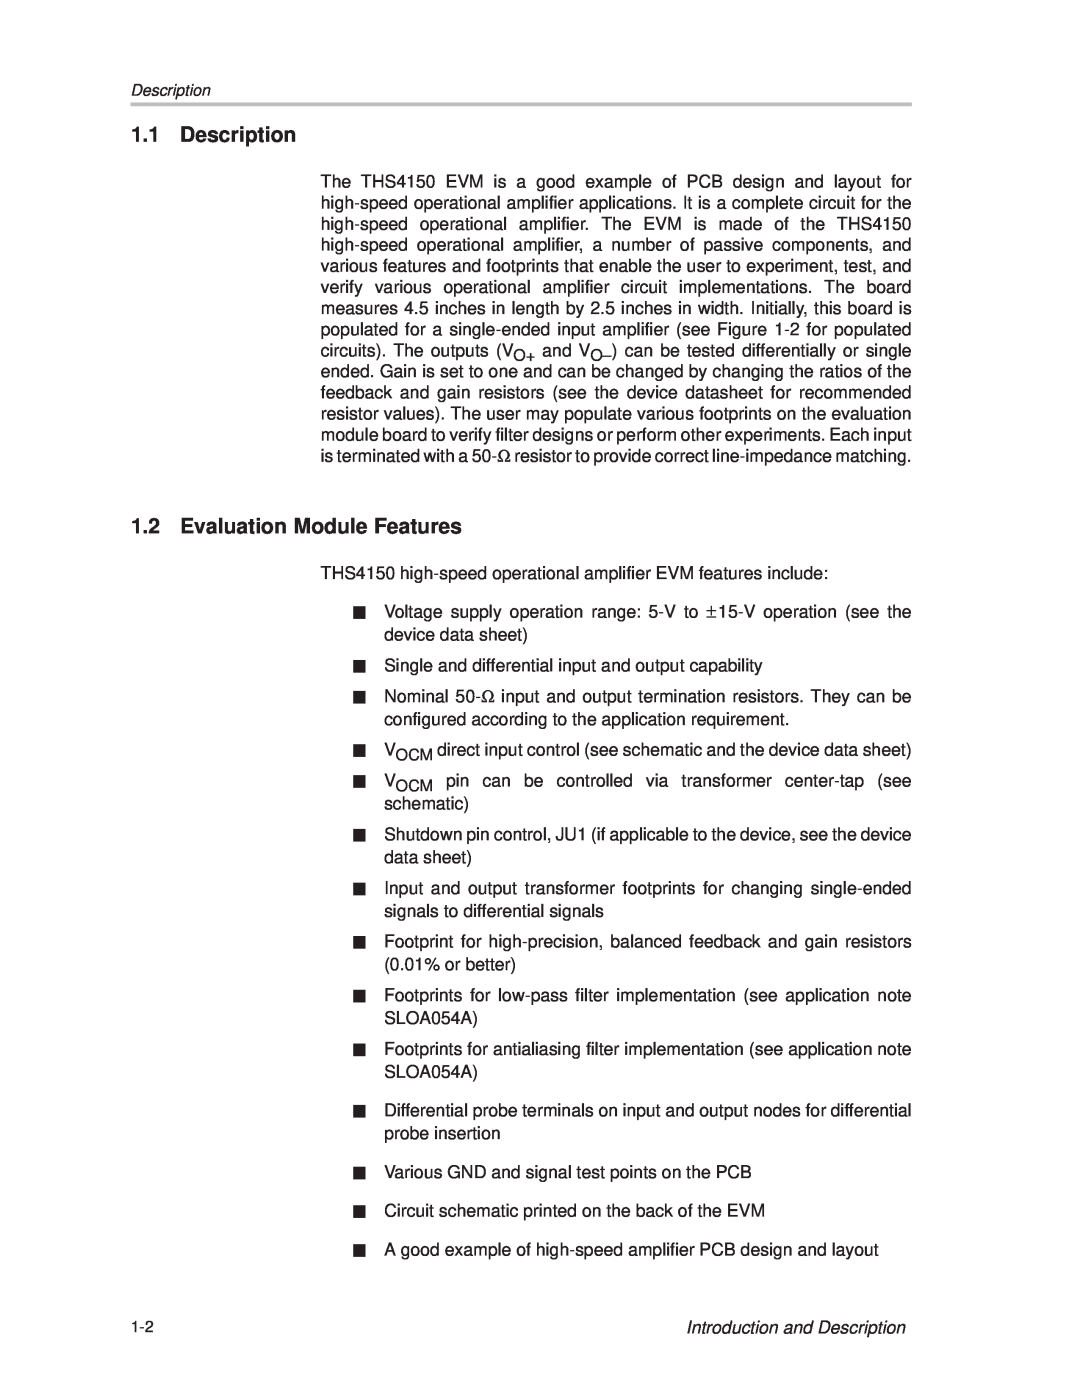 Texas Instruments THS4150 manual Evaluation Module Features, Introduction and Description 